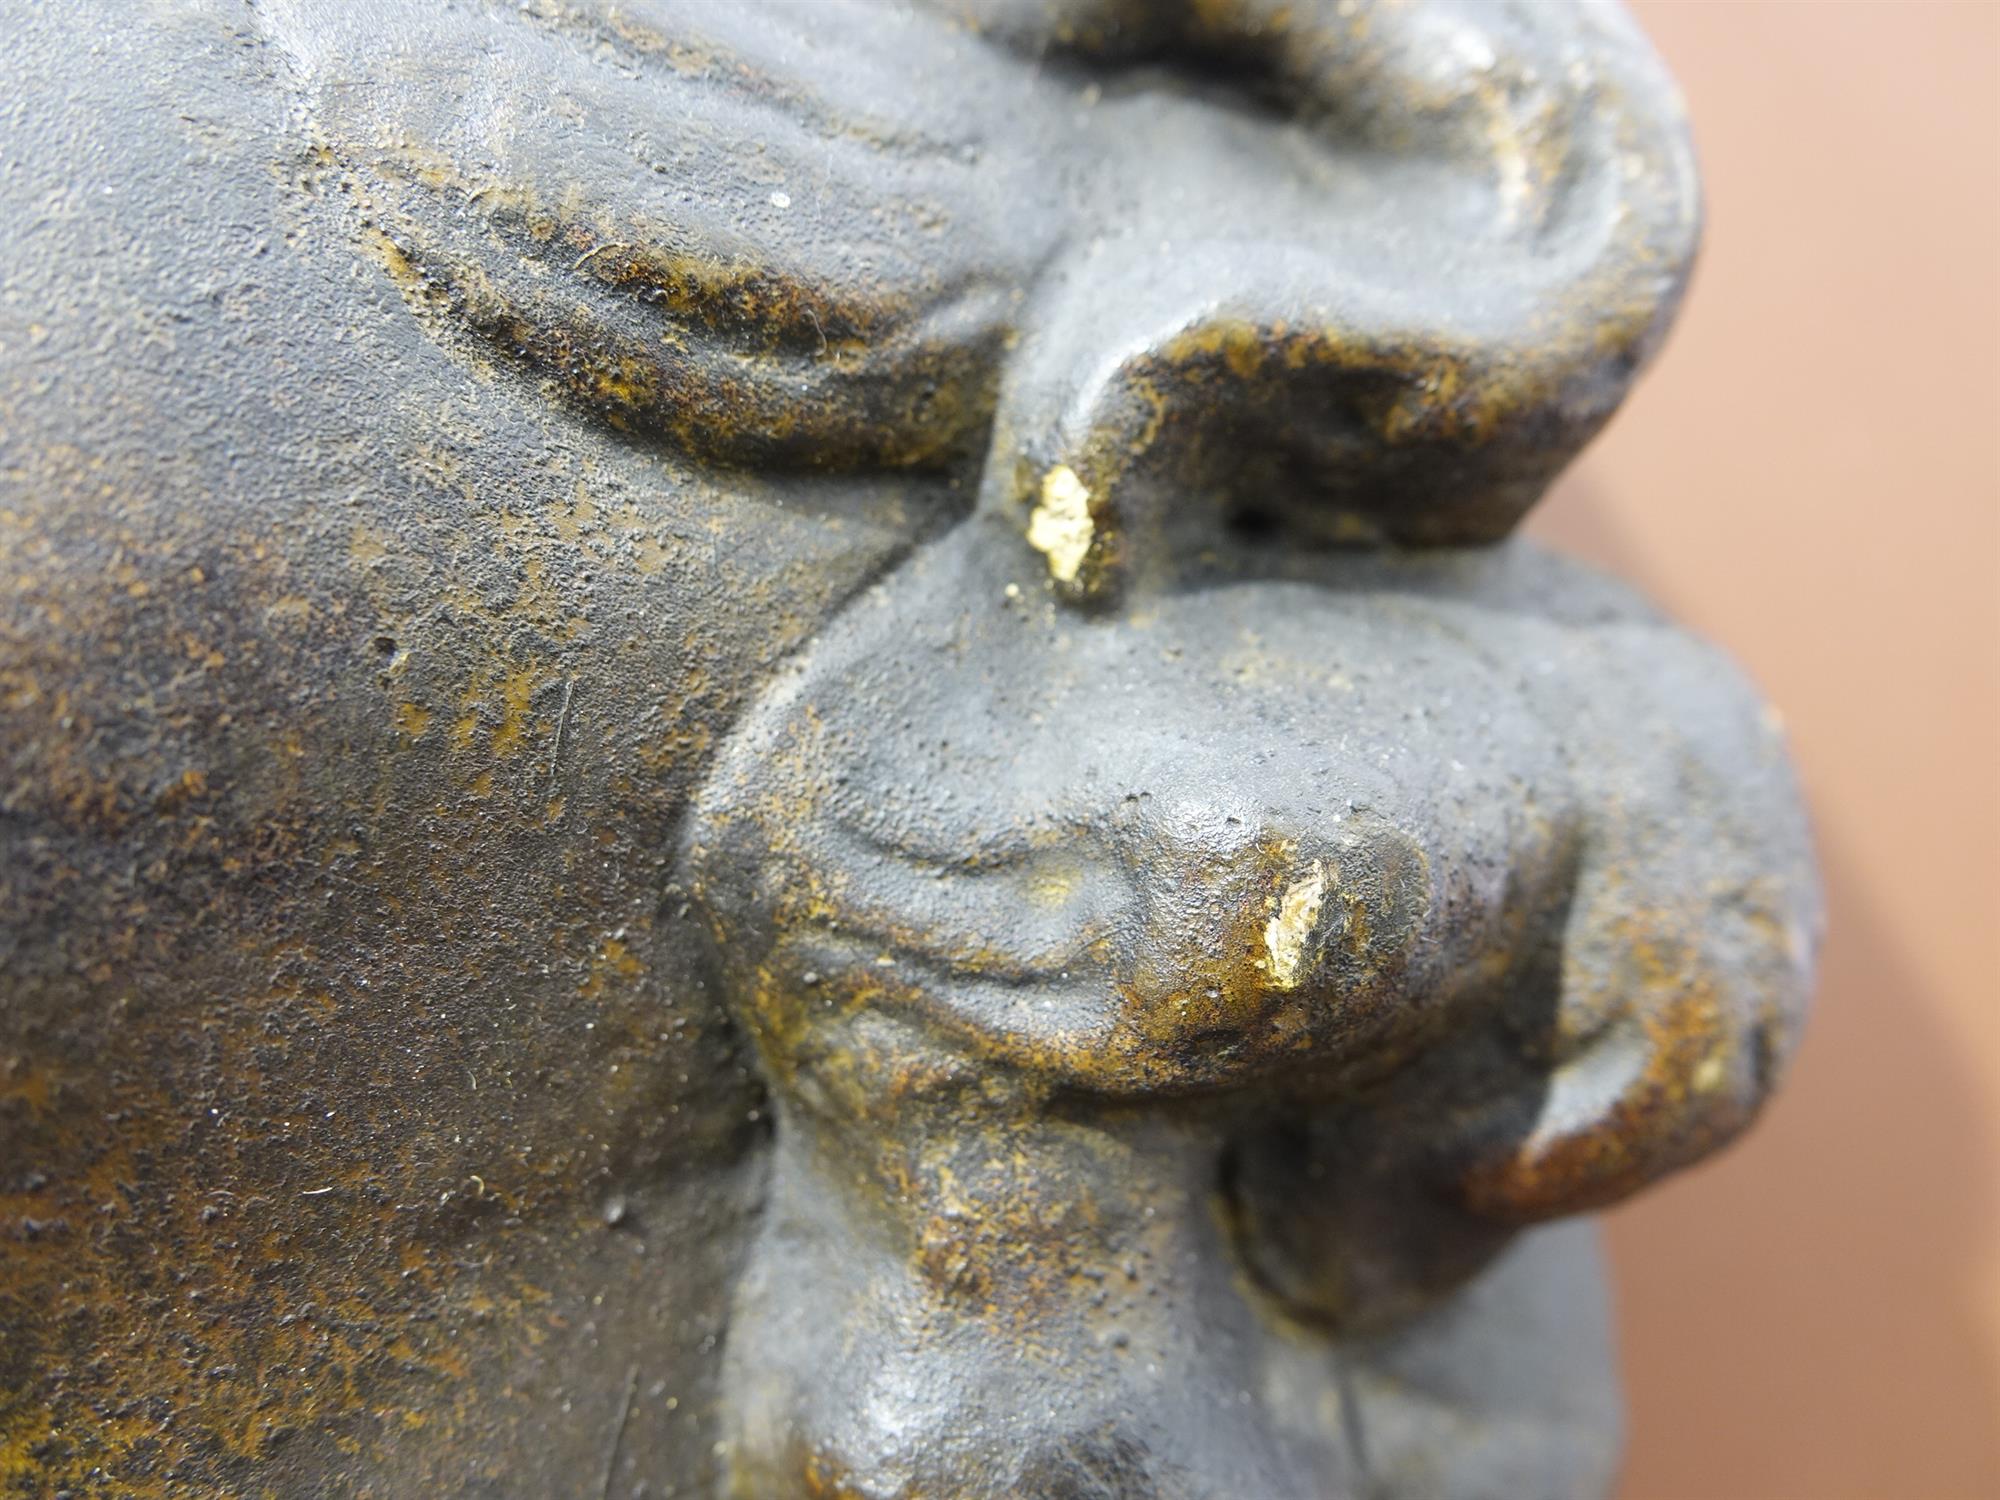 ***Please note: this is ceramic with a 'bronzed' finish rather than bronze*** A BRONZED DEATH MASK - Image 7 of 12